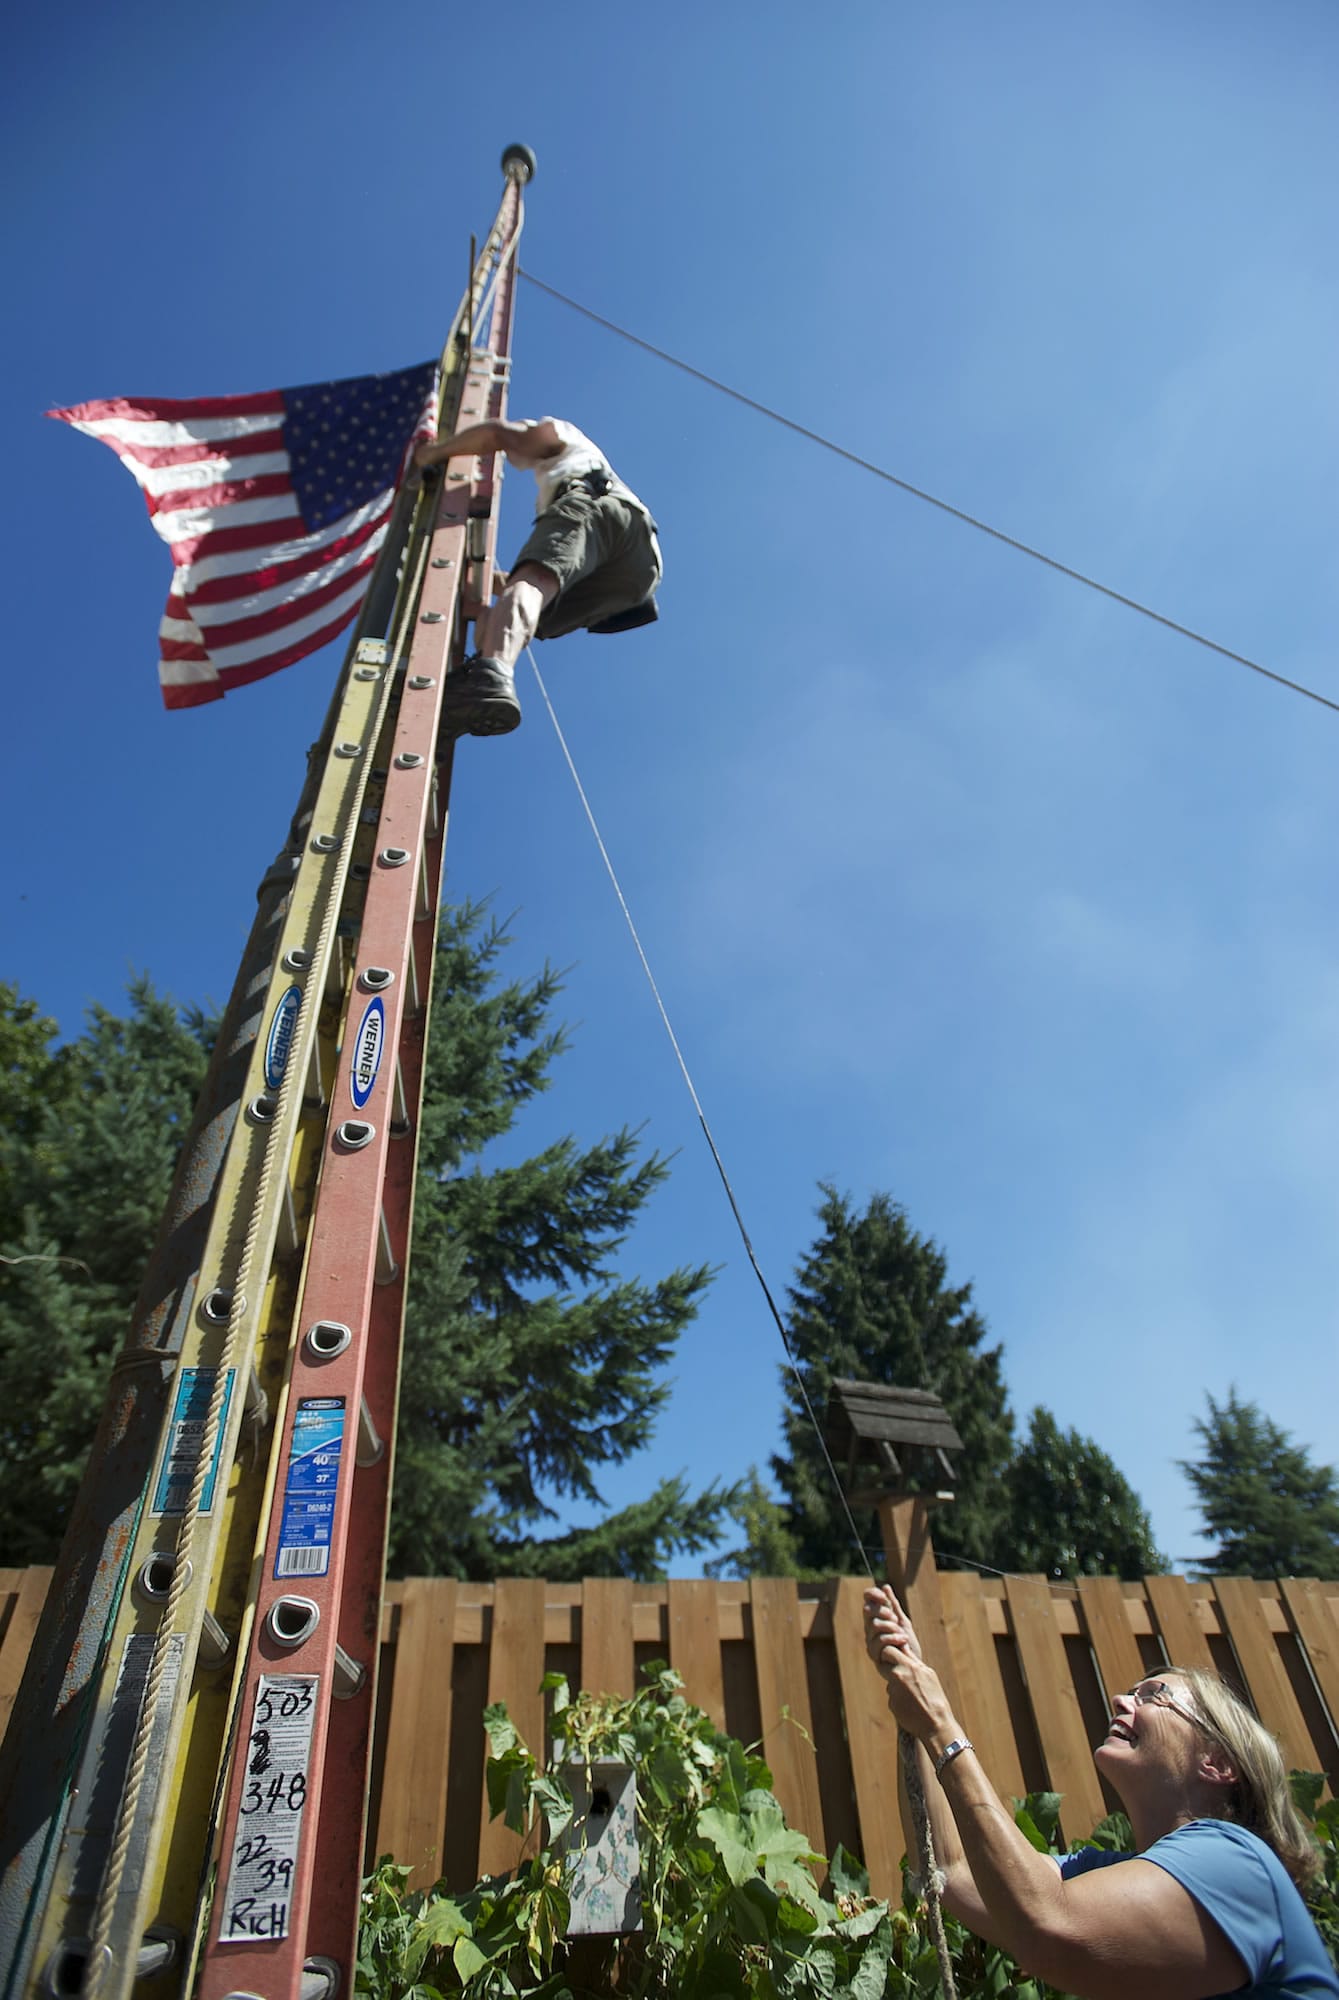 Pam McNamara hoists the flag in the patio of her home near Crown Park in Camas as Rich Ullsmith ascends a ladder to ensure the flagpole system he built is working smoothly.